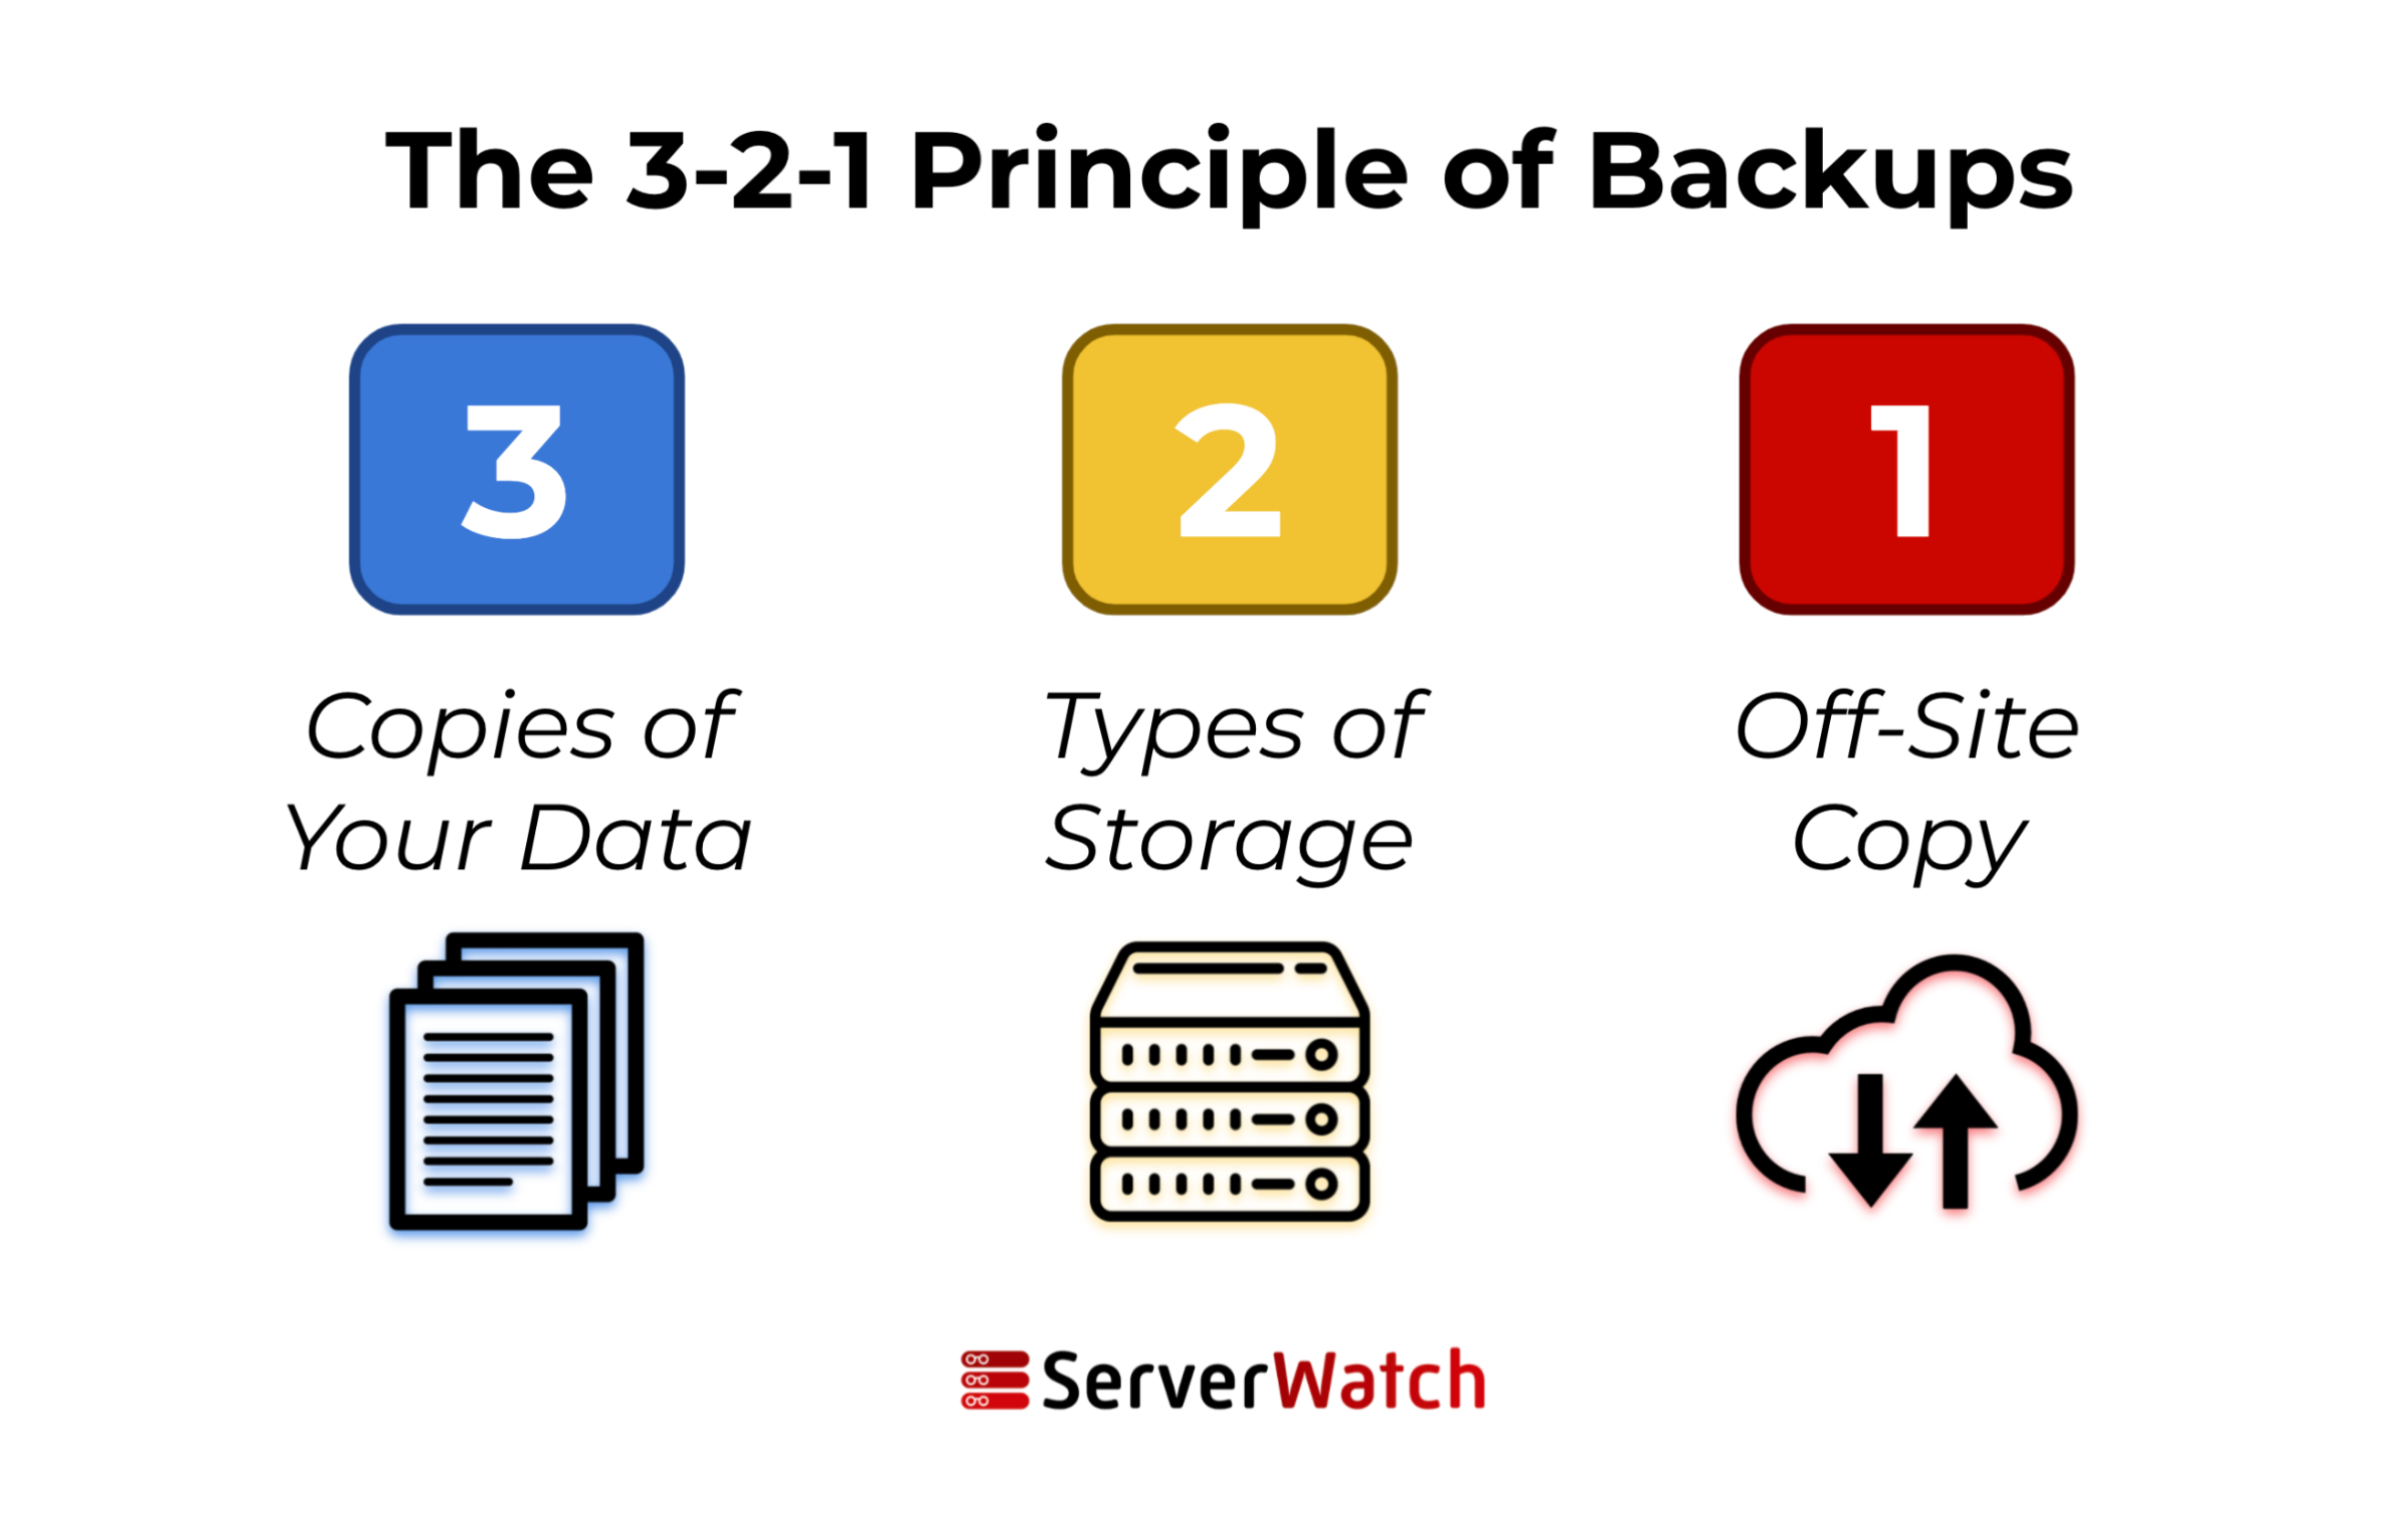 A graphic design showing the 3-2-1 principle of data backups which states every organization should have 3 copies of its data, 2 copies living in different types of storage, and at least 1 in an off-site or cloud location.